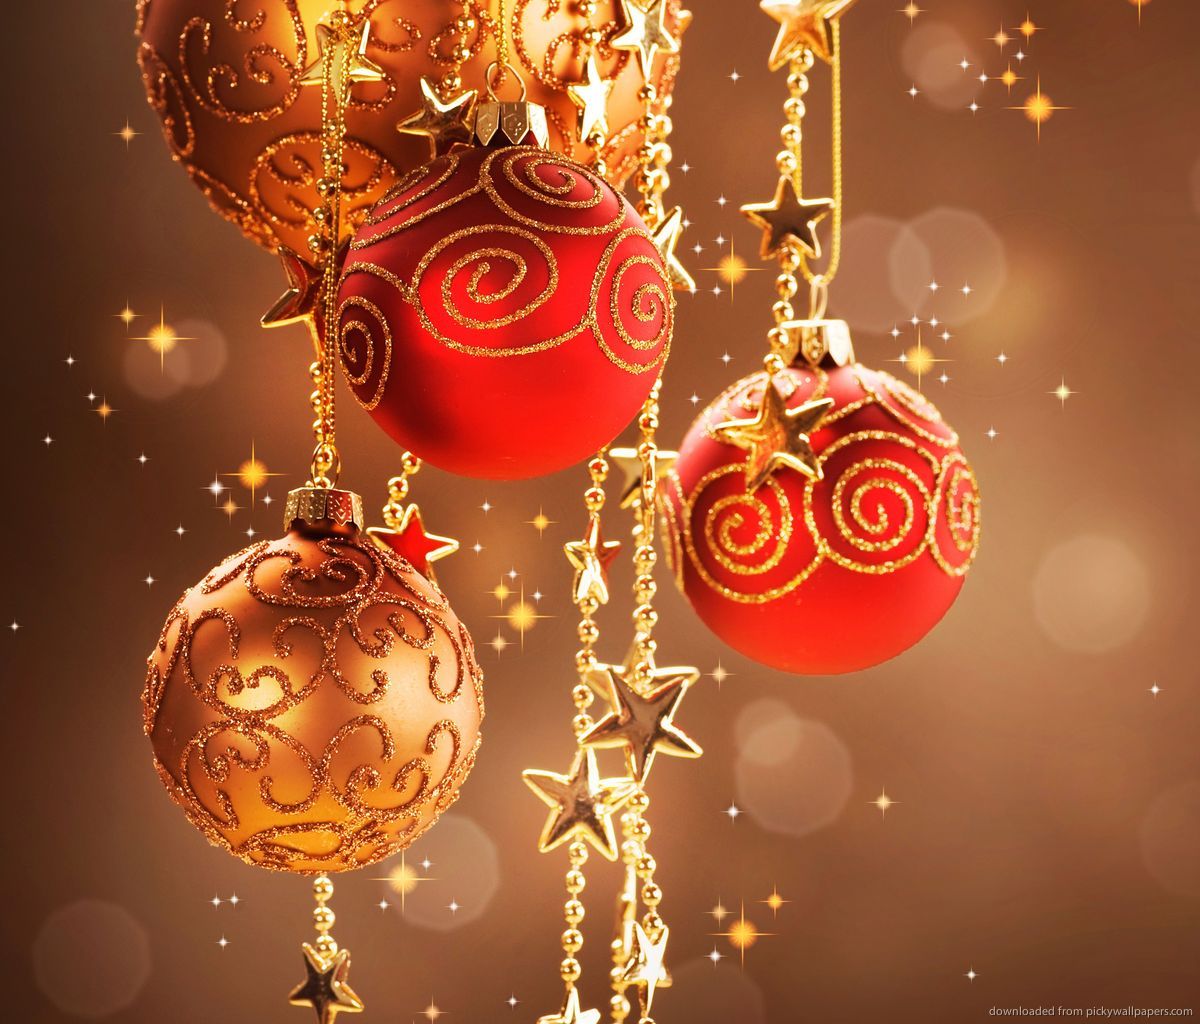 Download Christmas Decorations Ultra HD Wallpaper For Samsung